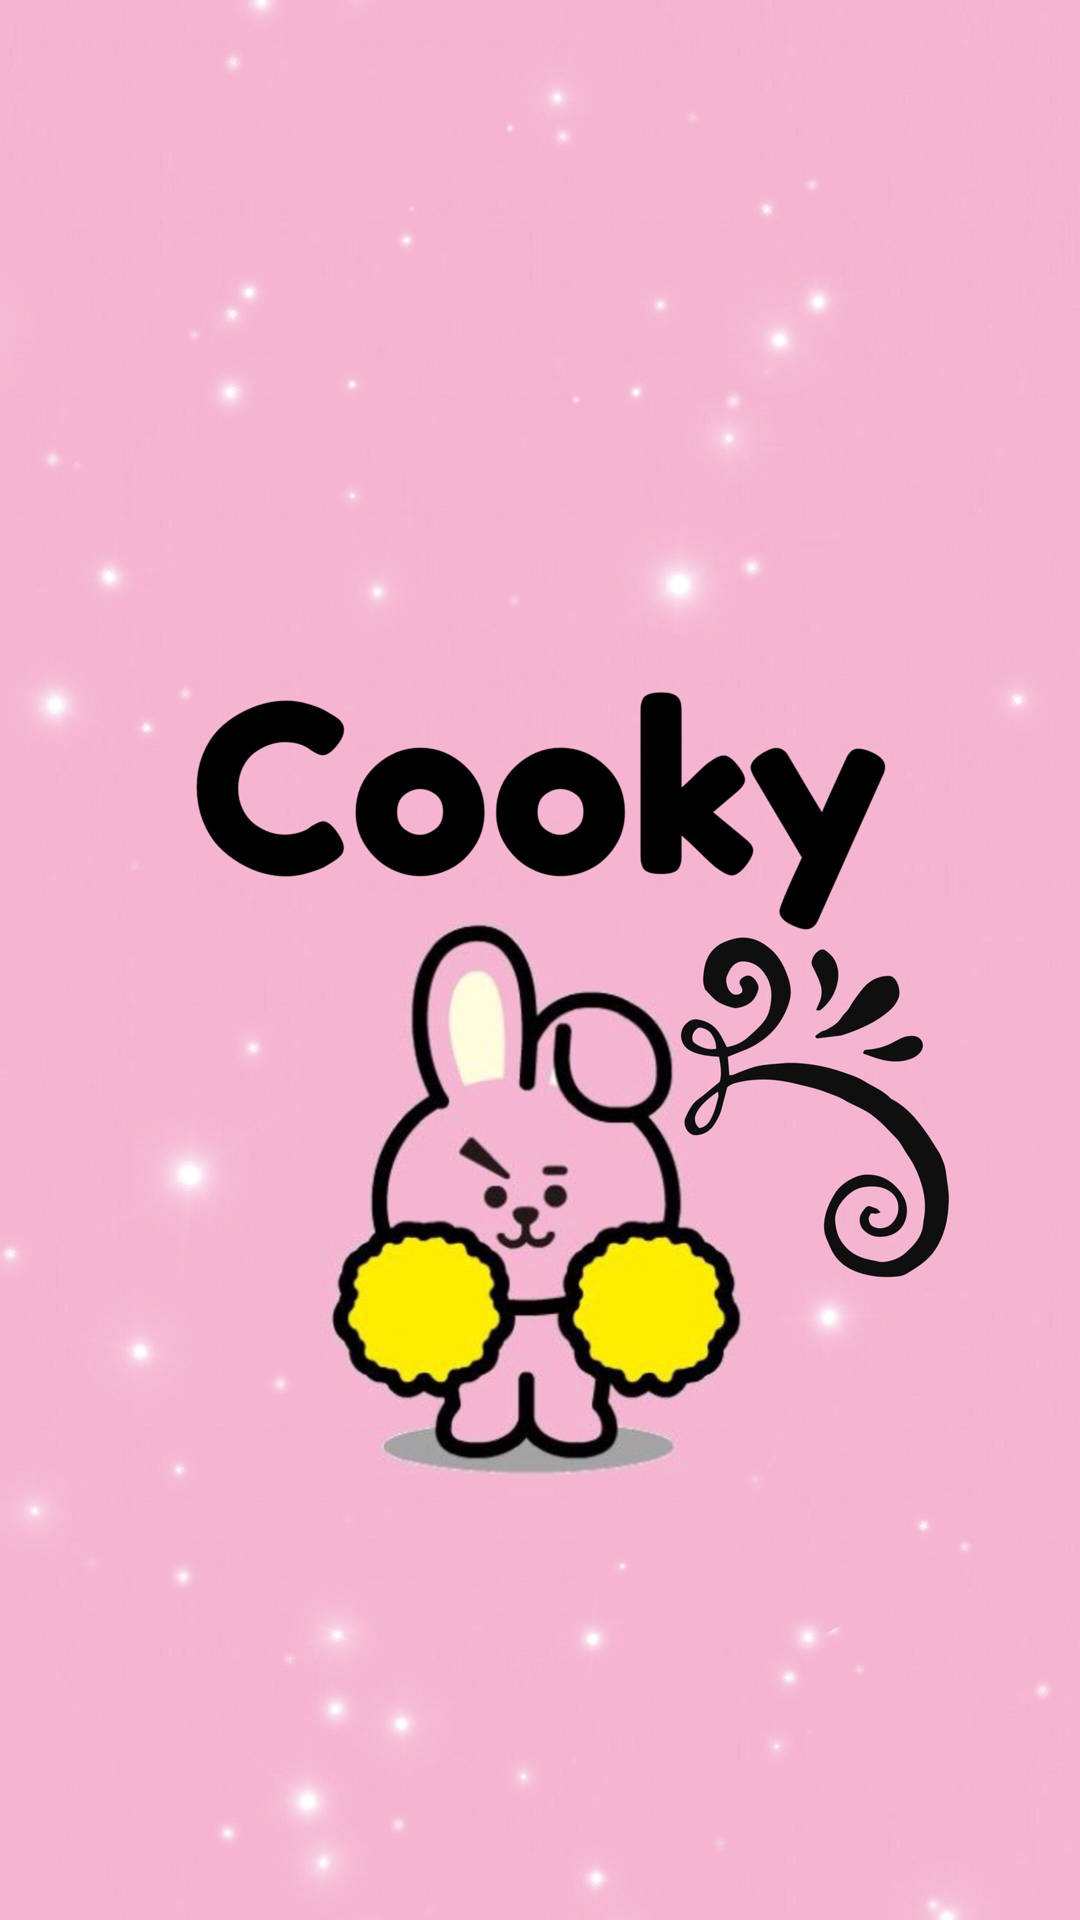 Adorable Cooky Bt21 Character Showing Off His Strong And Cute Side. Background